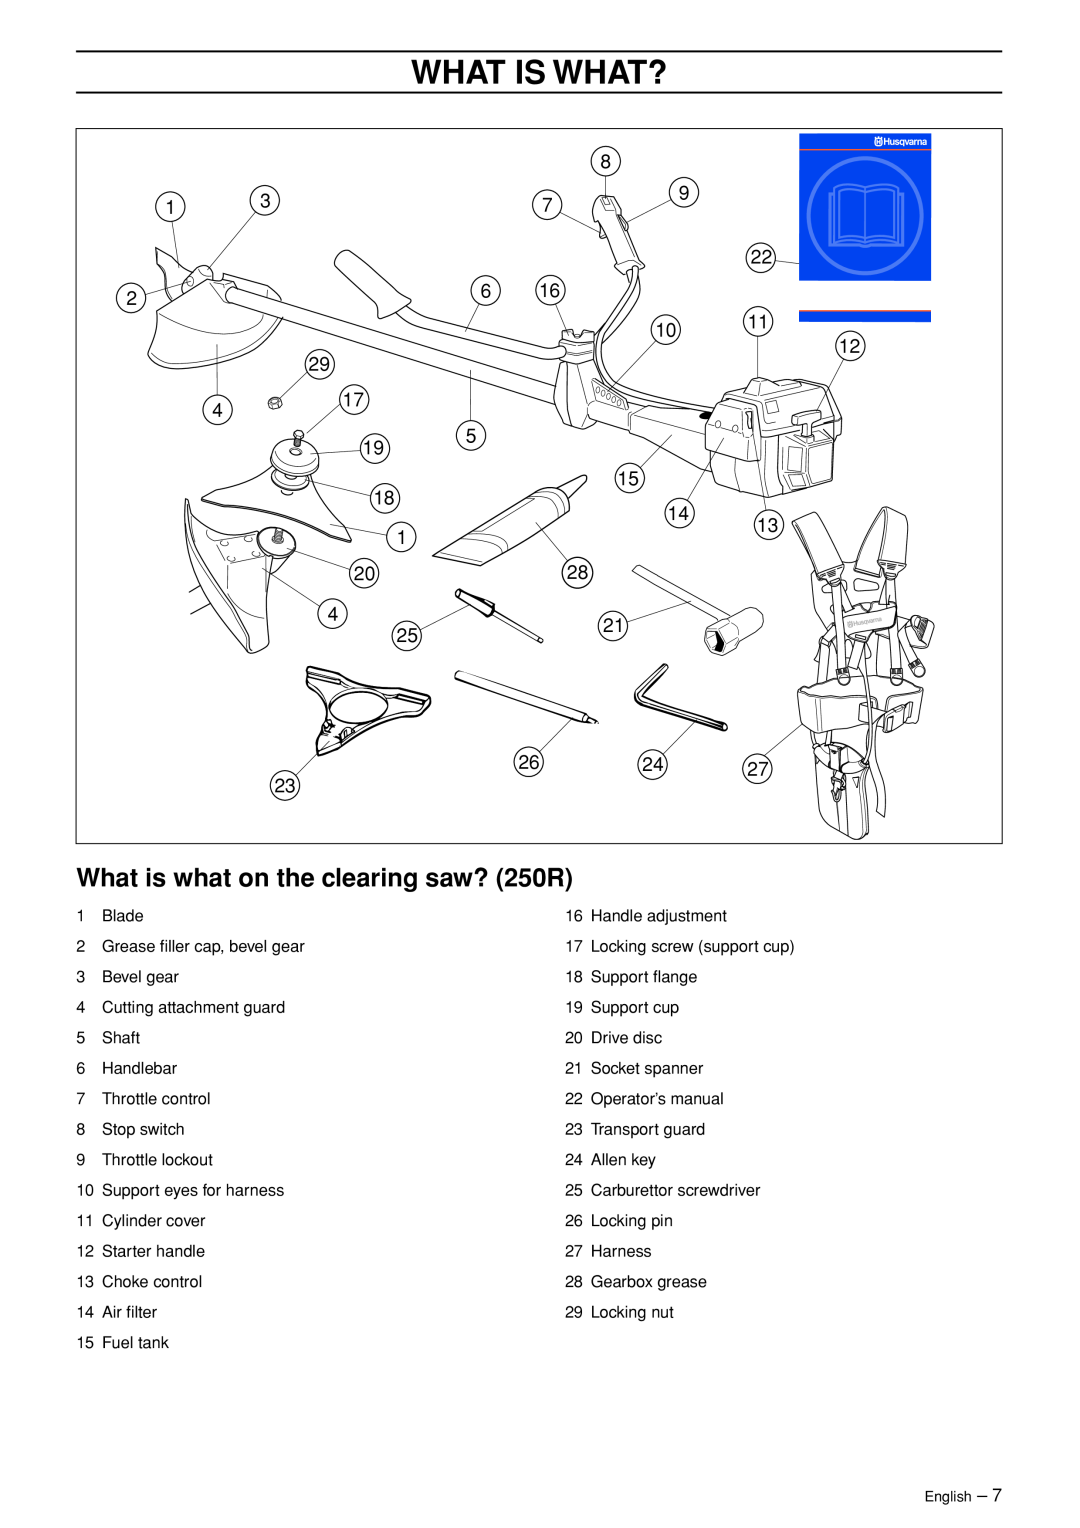 Husqvarna 250 R manual What is what on the clearing saw? 250R, What Is What? 